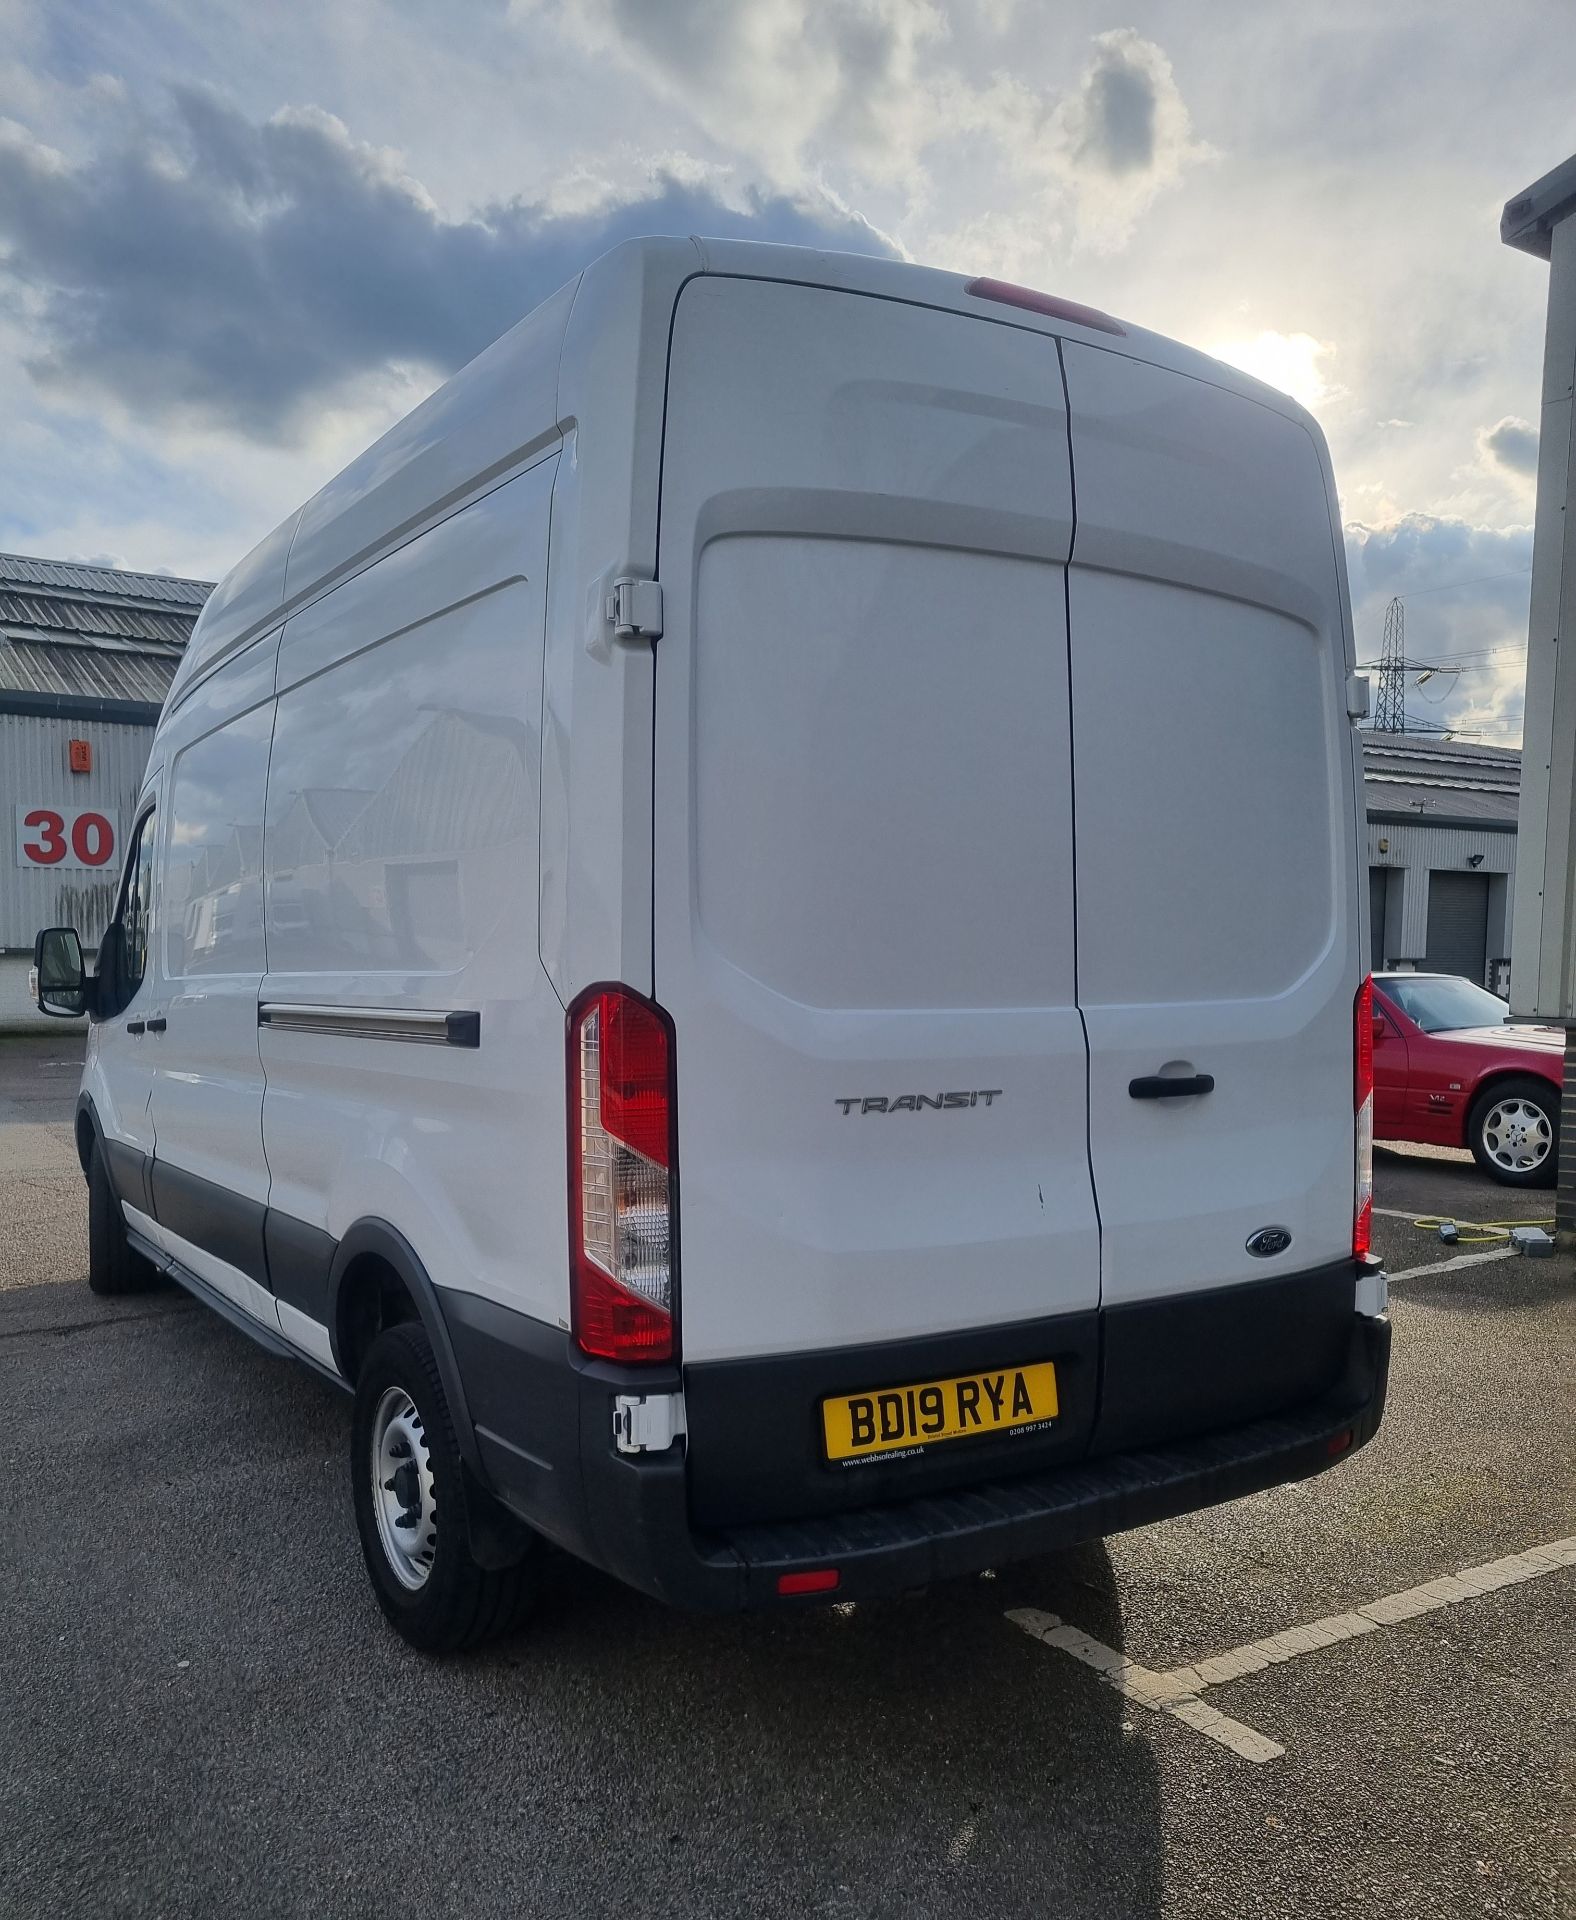 2019 FORD TRANSIT PANEL VAN - 99,507 MILES - SERVICED REGULARLY - READY FOR WORK - Image 7 of 8